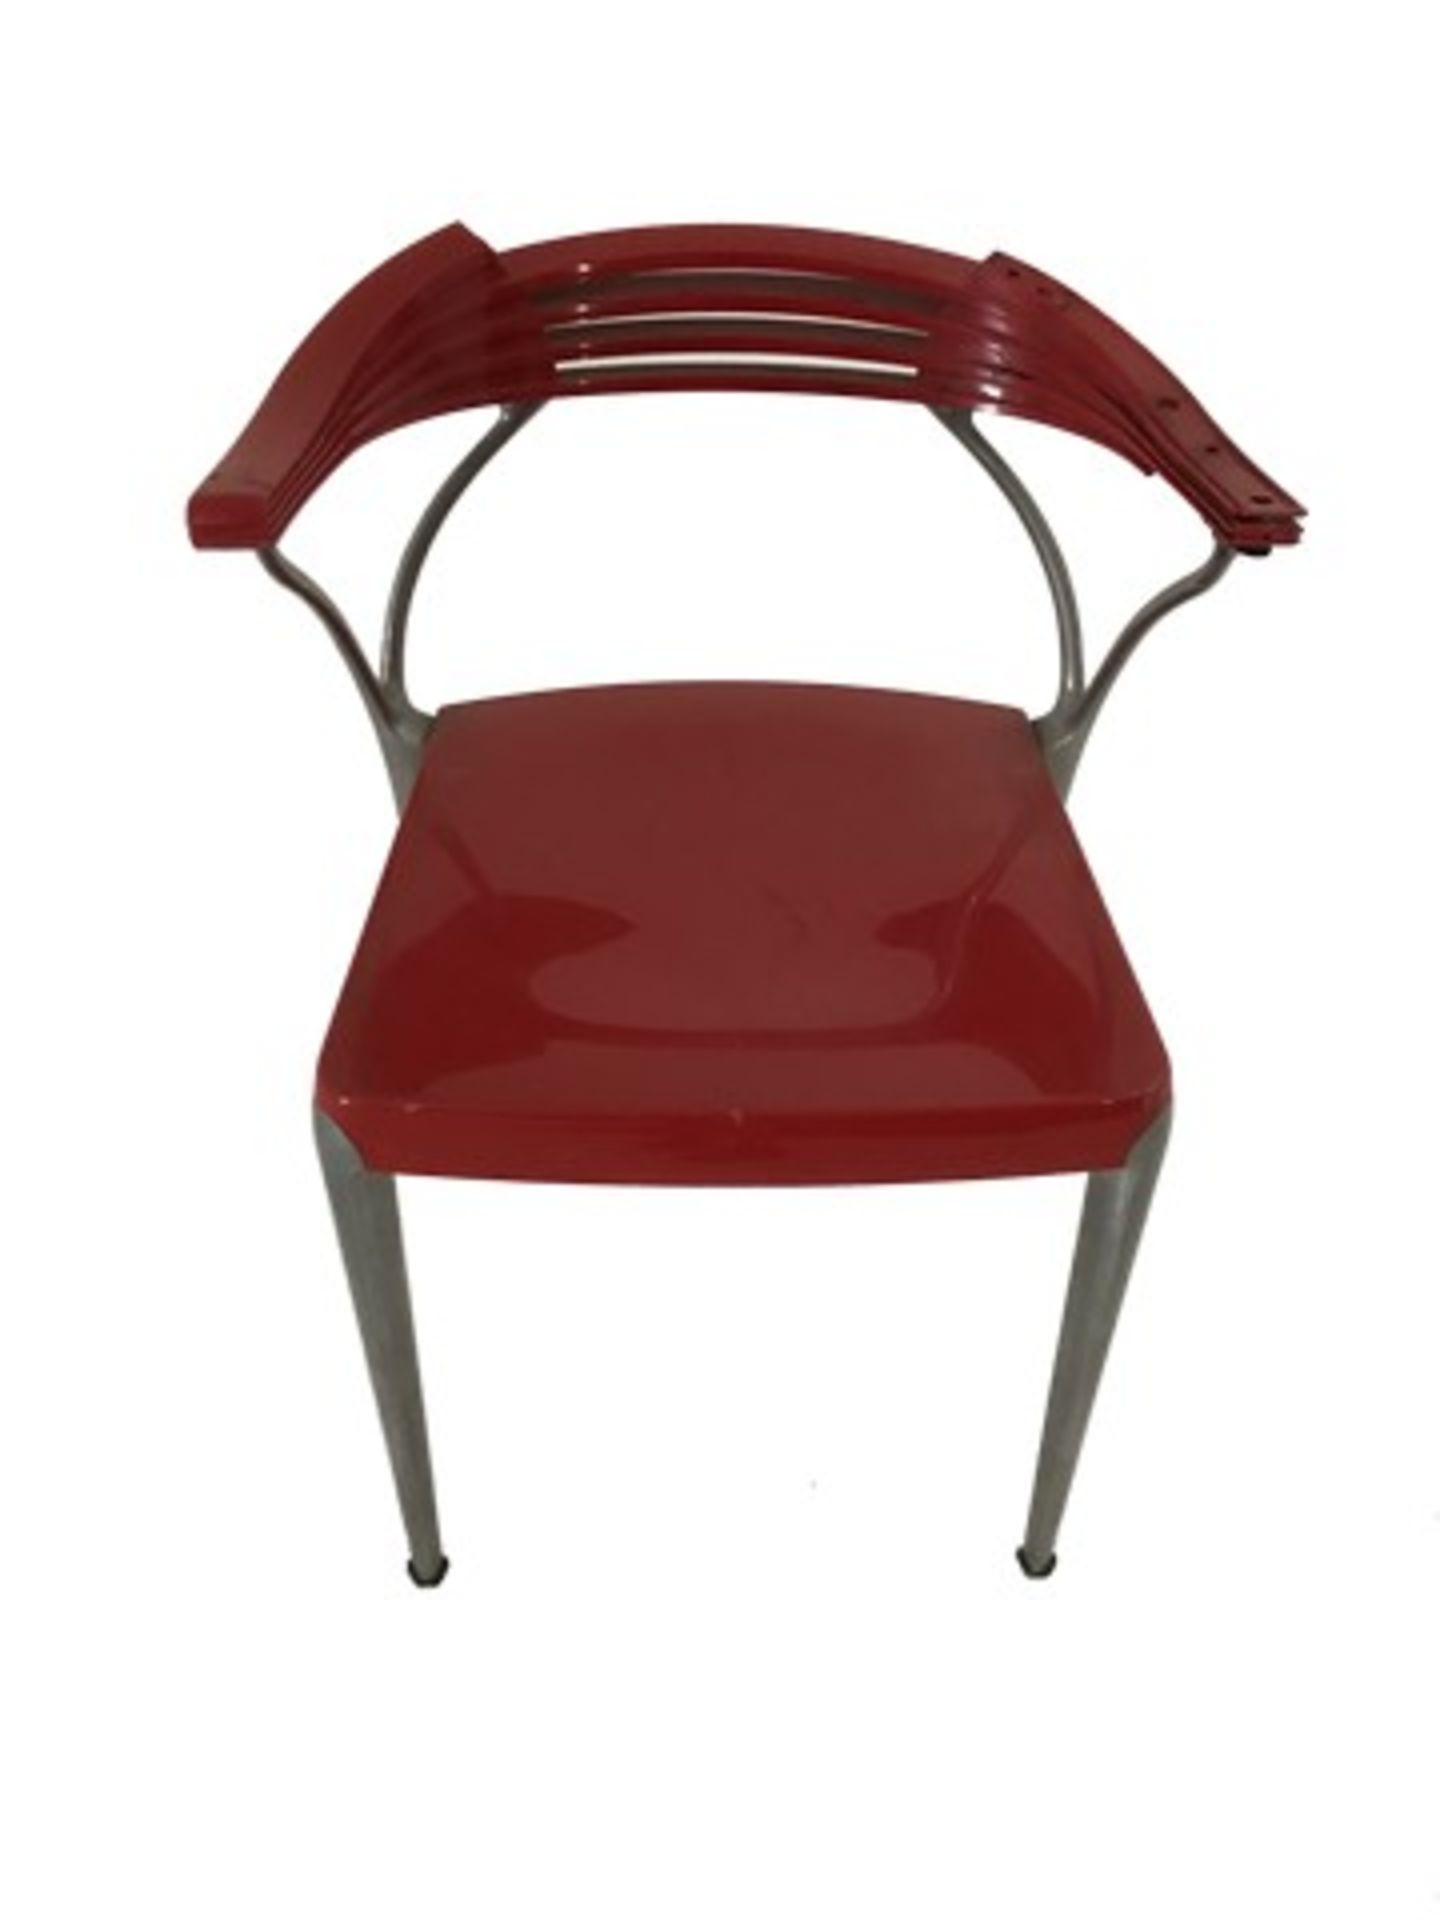 Red Plastic Chair - Image 2 of 3